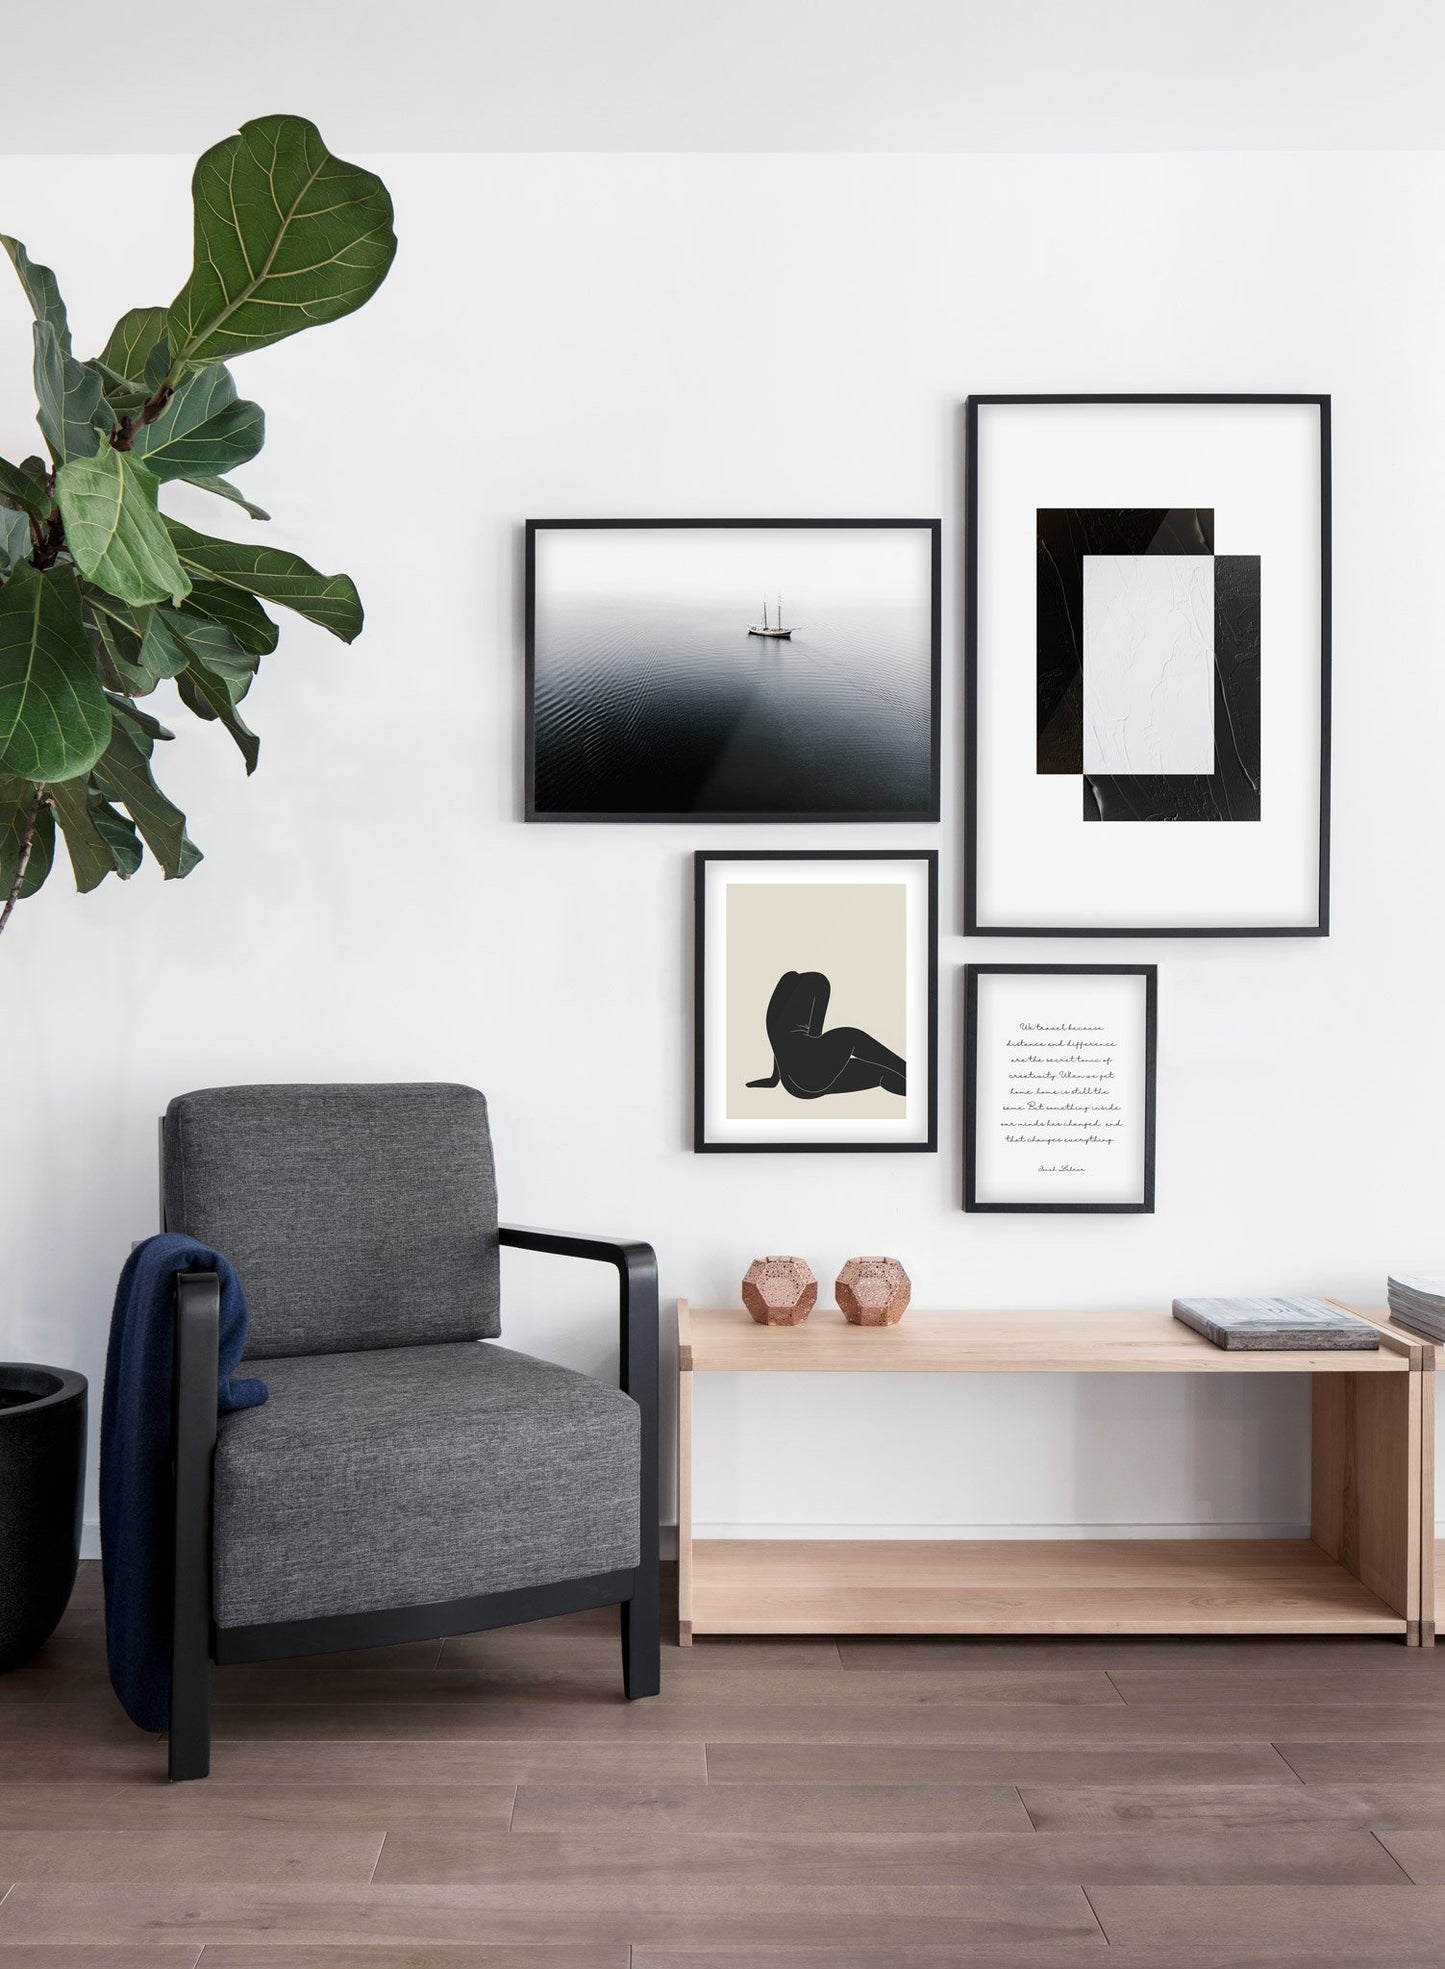 Lone ship modern minimalist photography poster by Opposite Wall - Living room with gallery wall quad